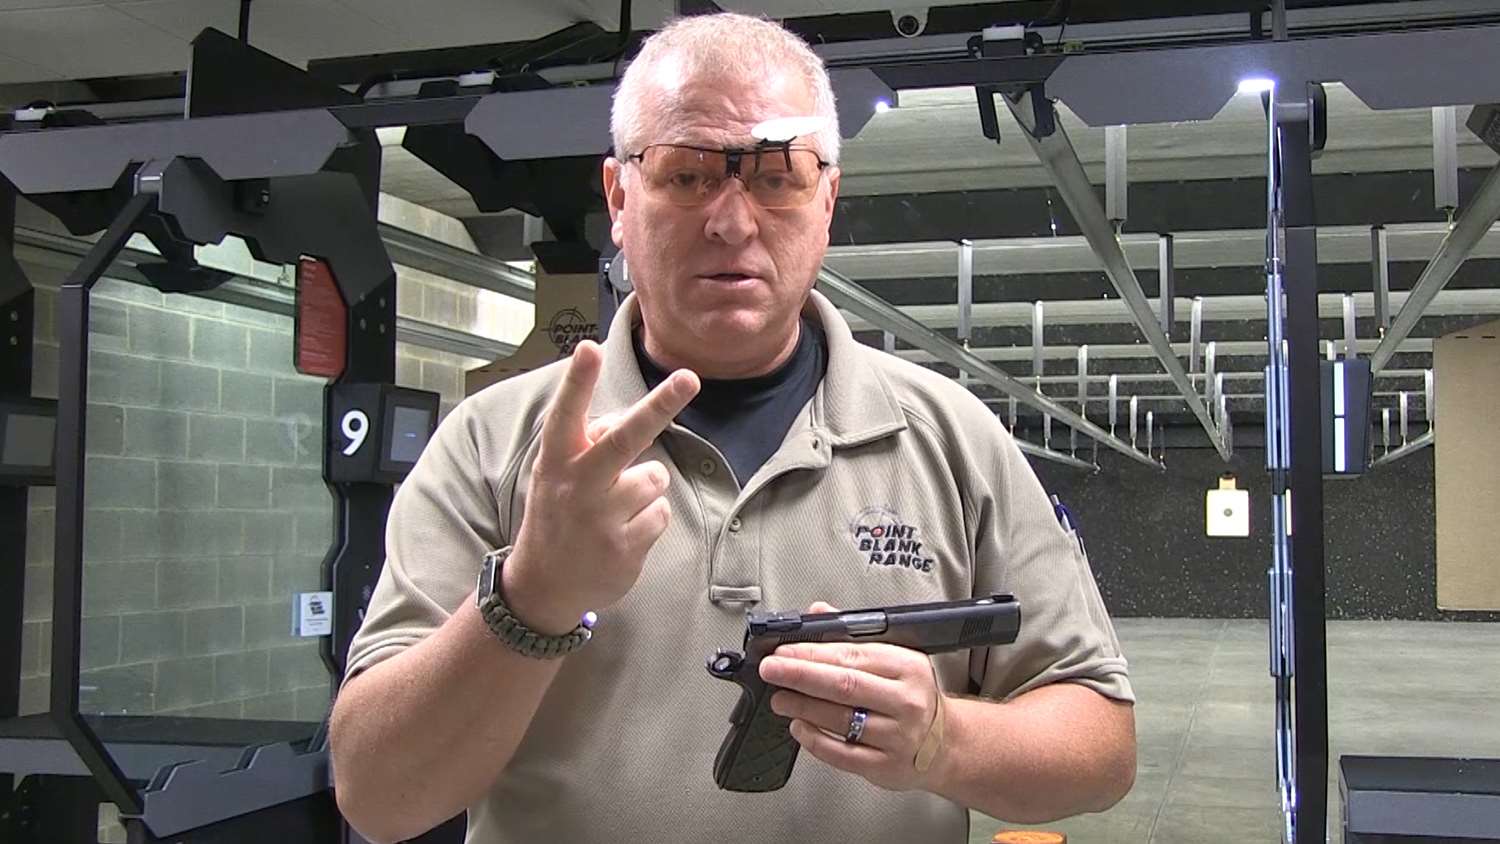 Brian Zins says that there are two types of trigger control: uninterrupted and wrong